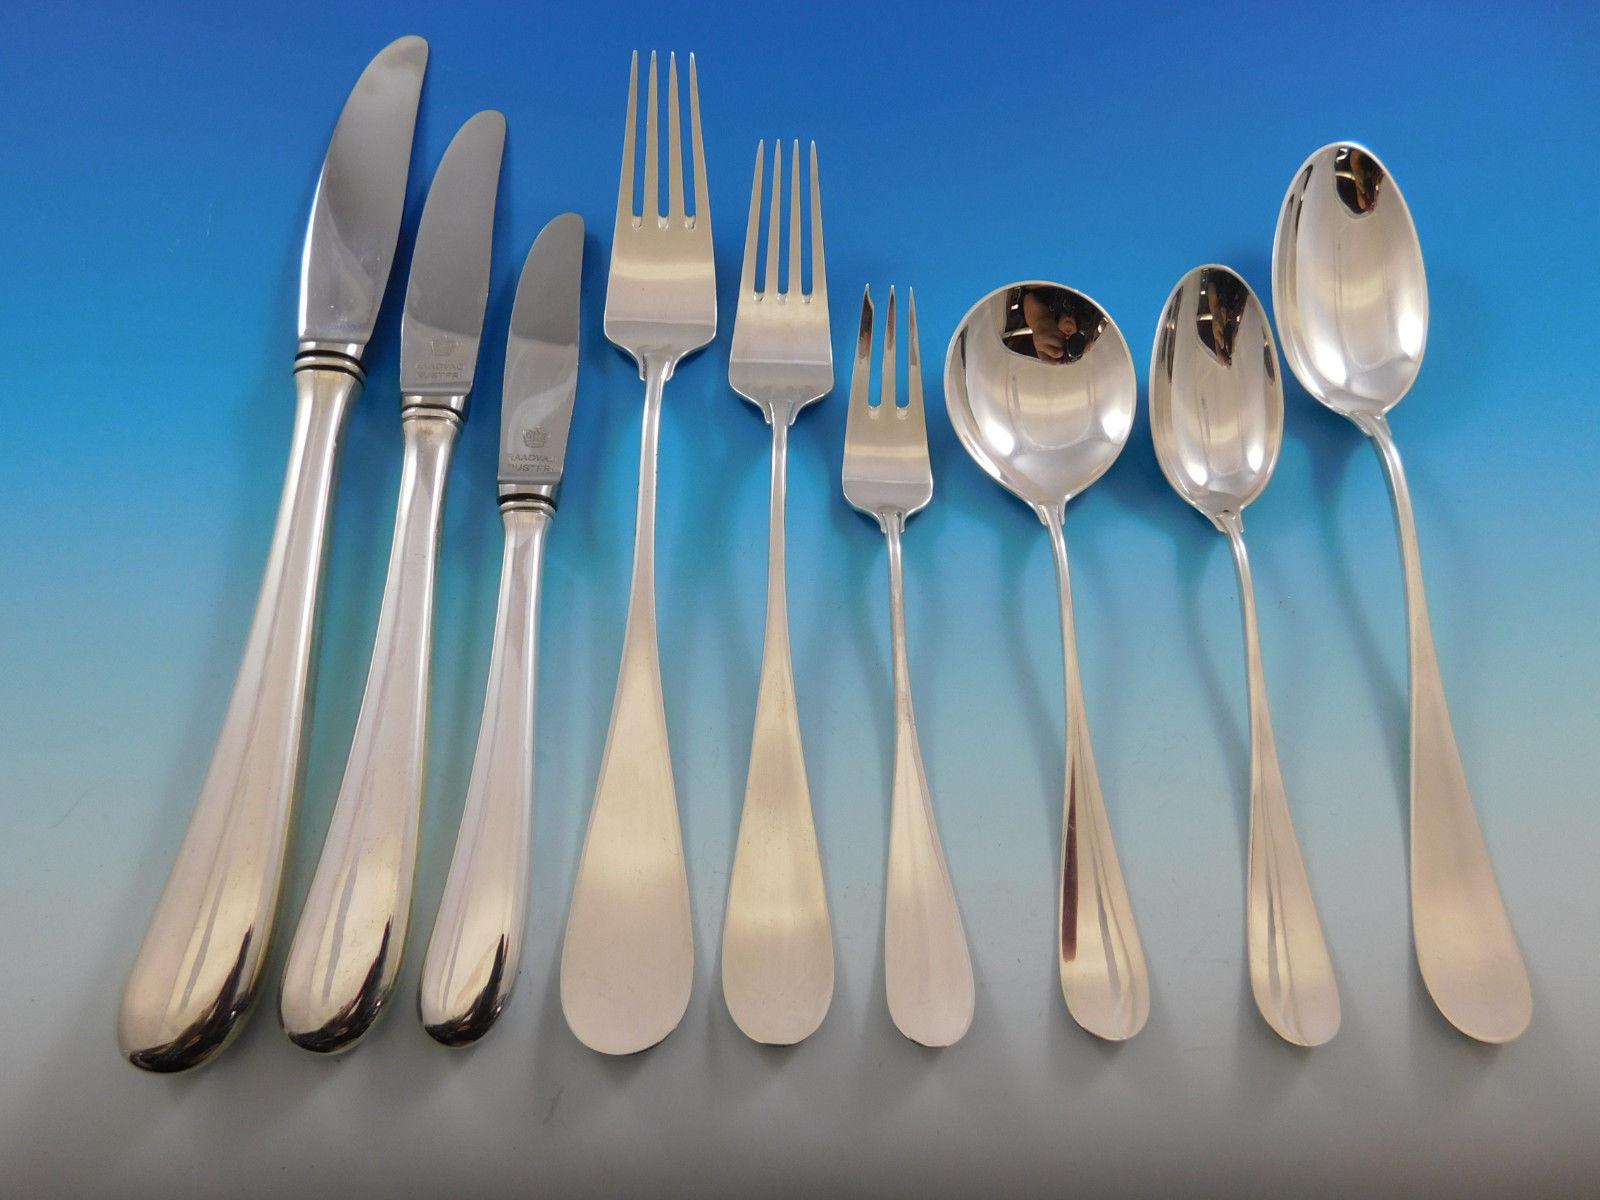 Large dinner and luncheon Scandinavian Modern Classic by Michelsen sterling silver flatware set, 82 pieces. This set includes:

Eight dinner size knives, 9 1/4